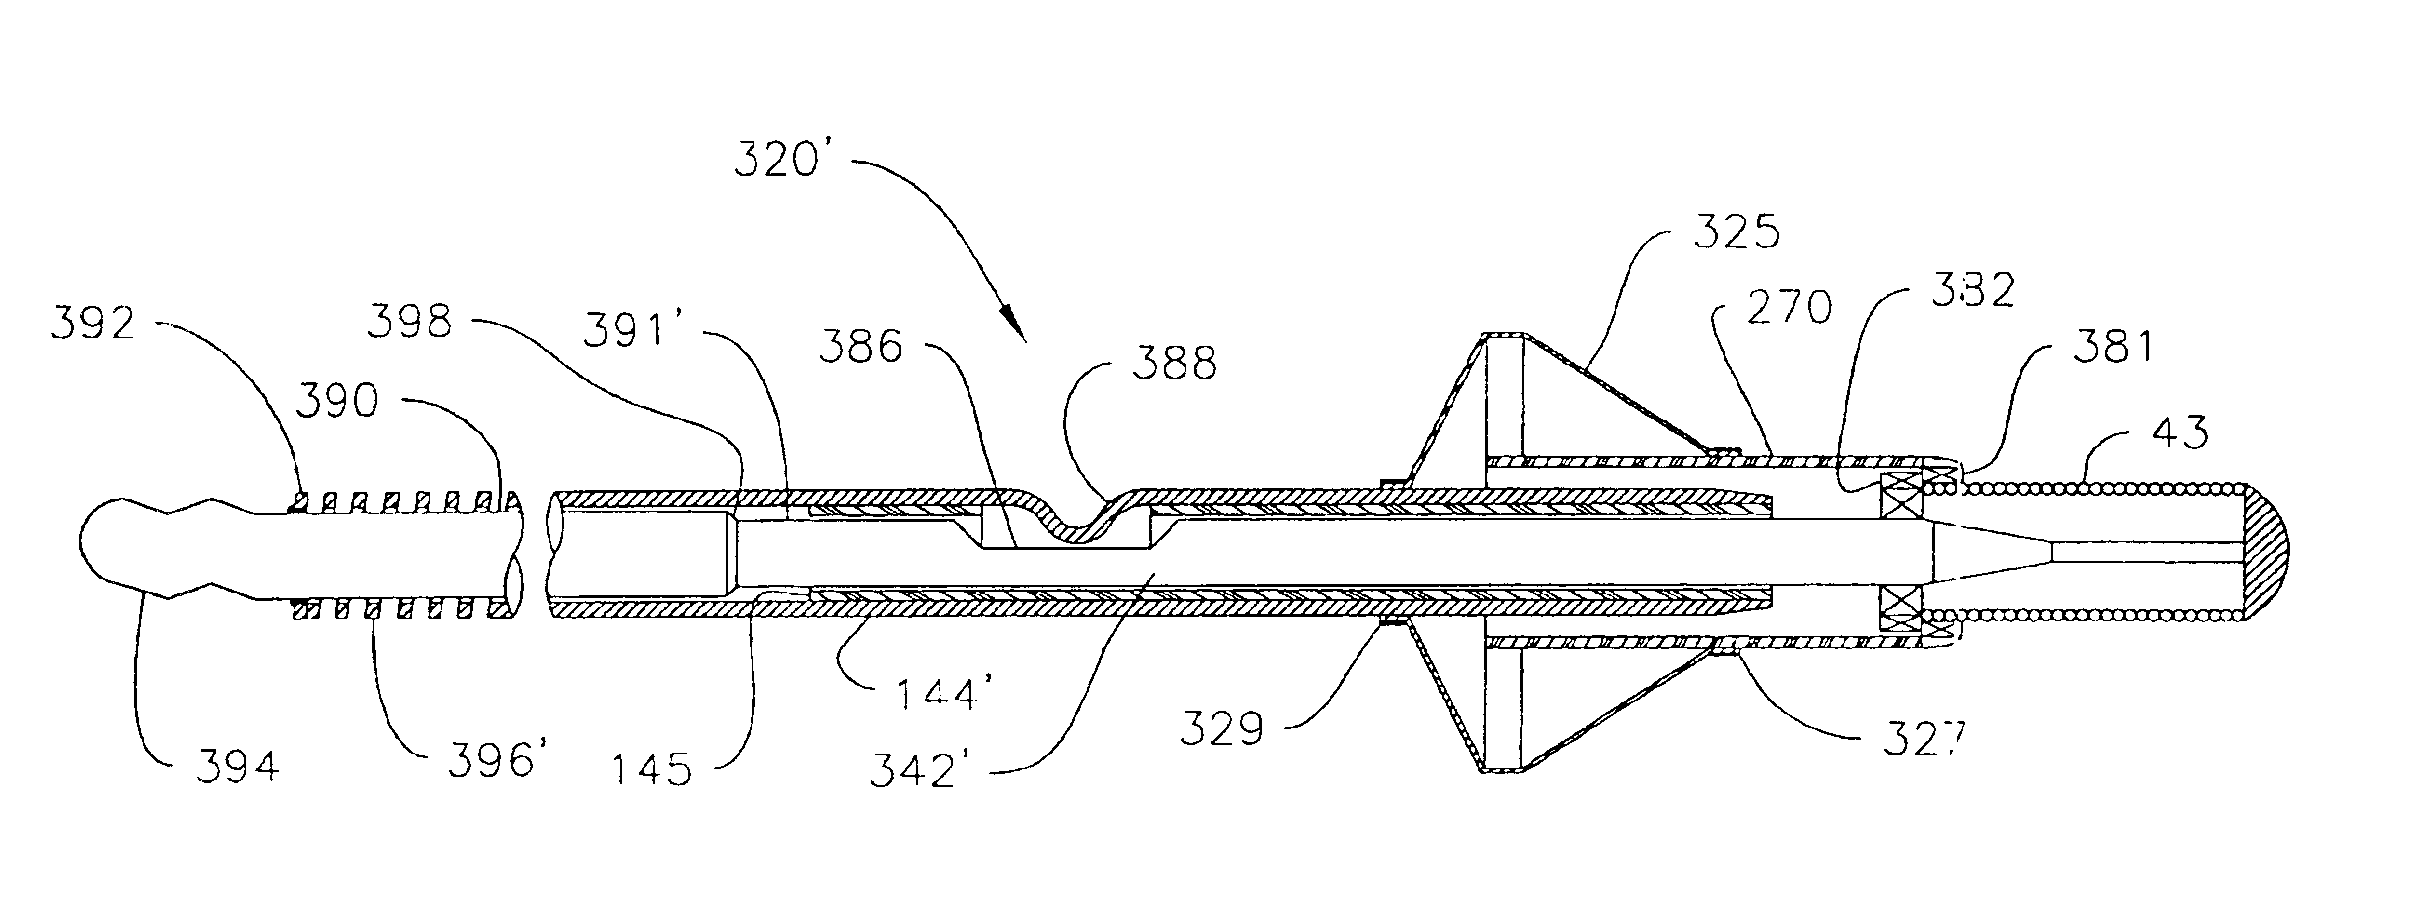 Guidewire apparatus for temporary distal embolic protection